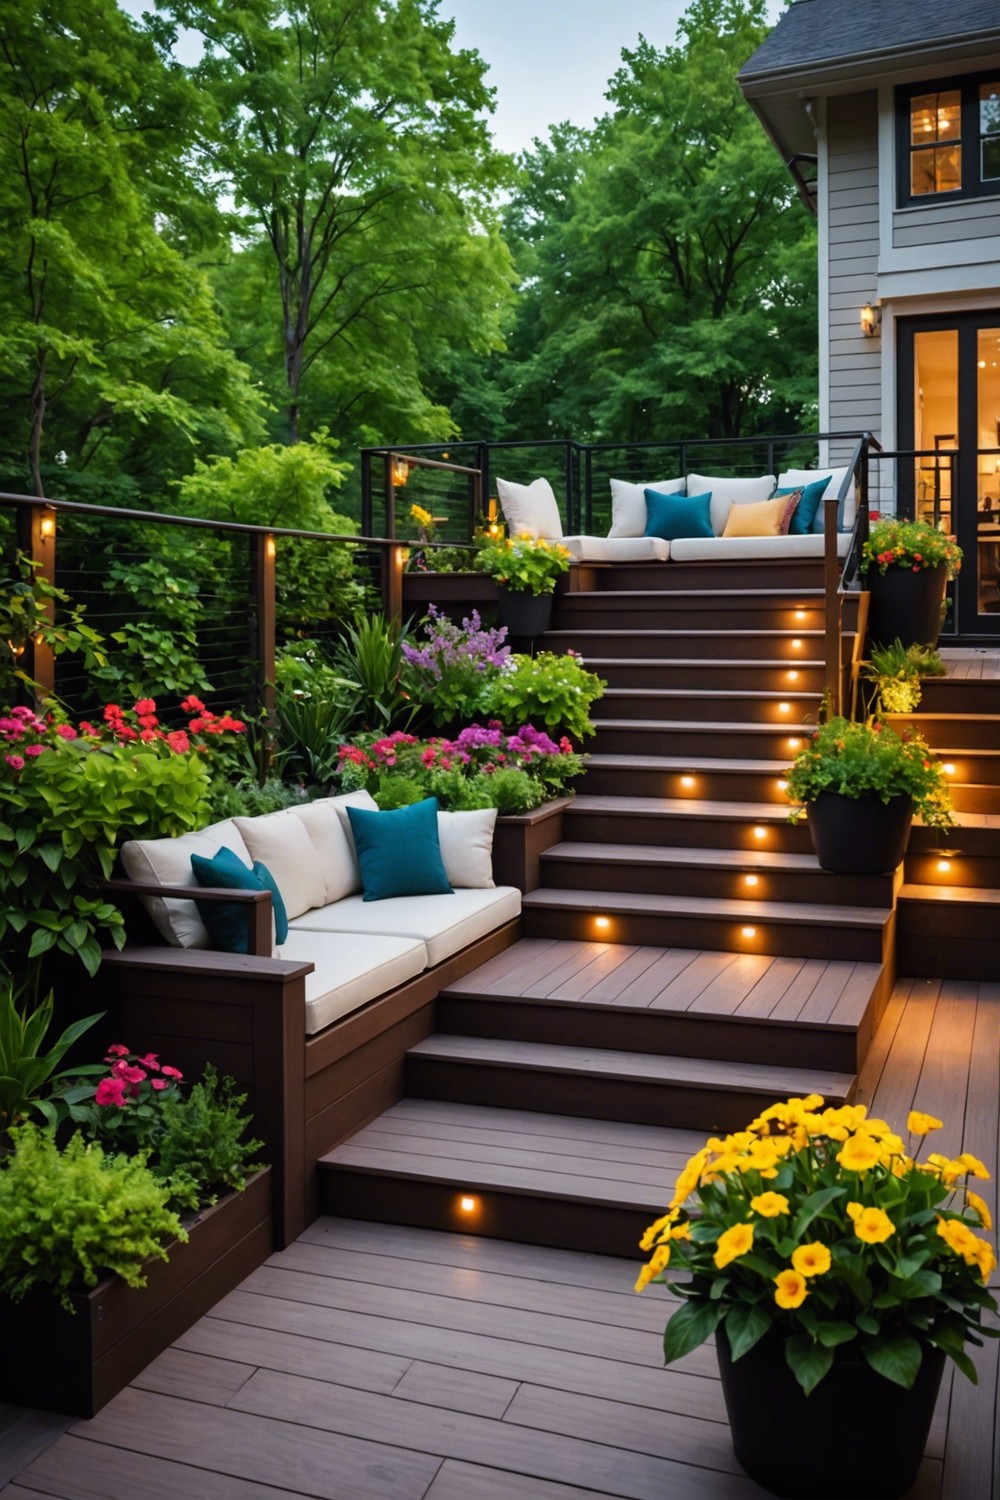 Deck with Built-in Planters